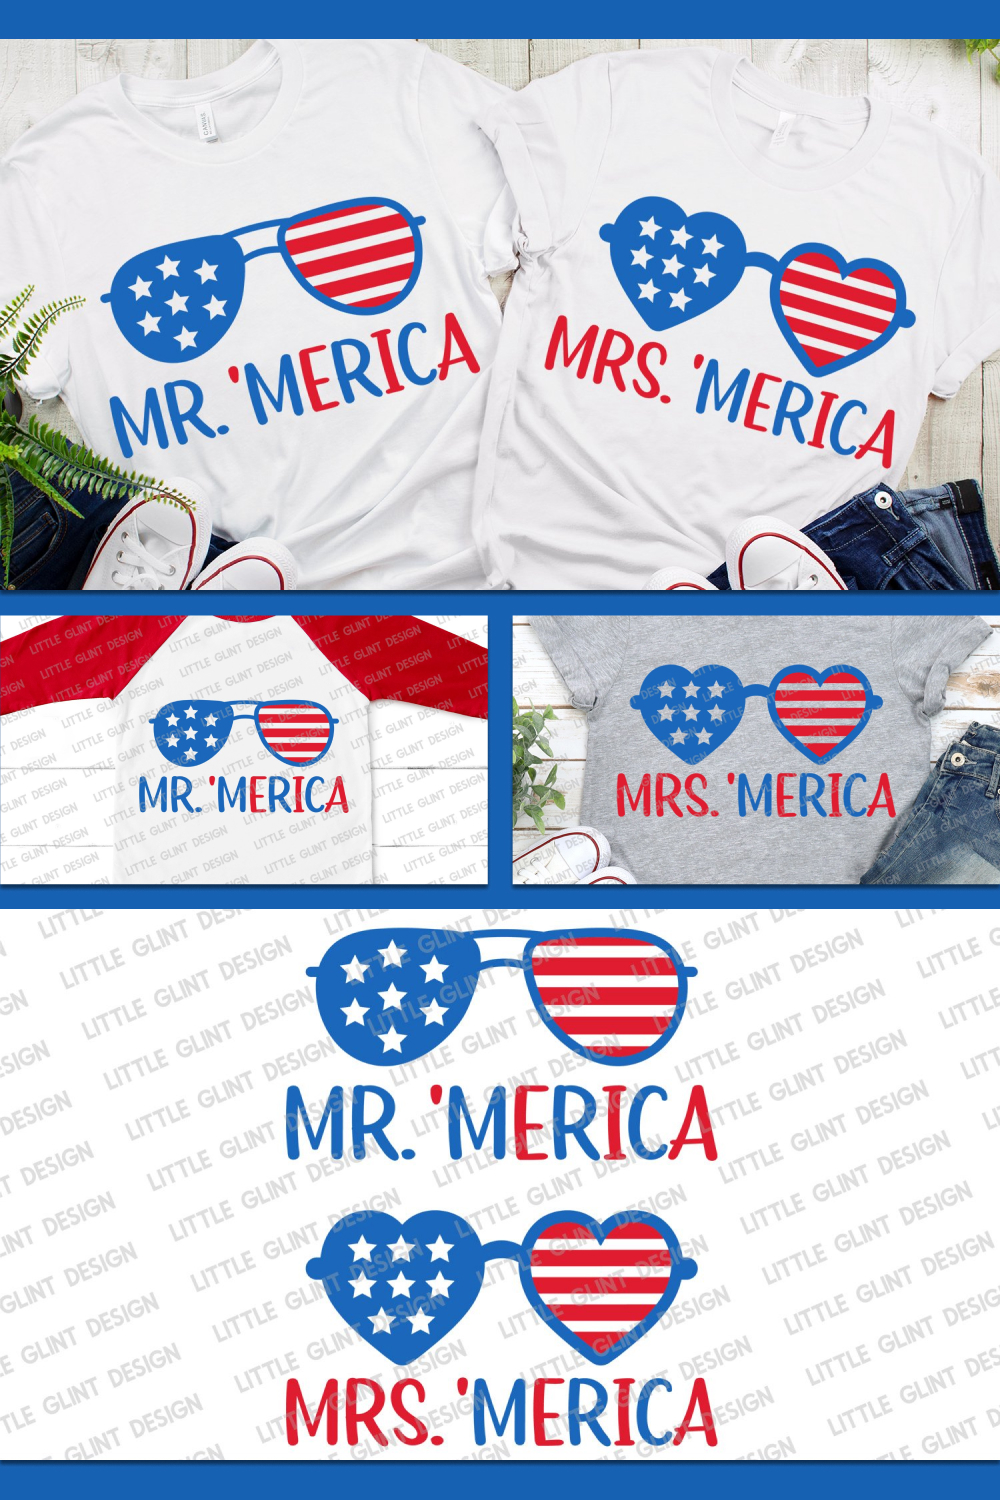 Stylish clothes with patriotic style.